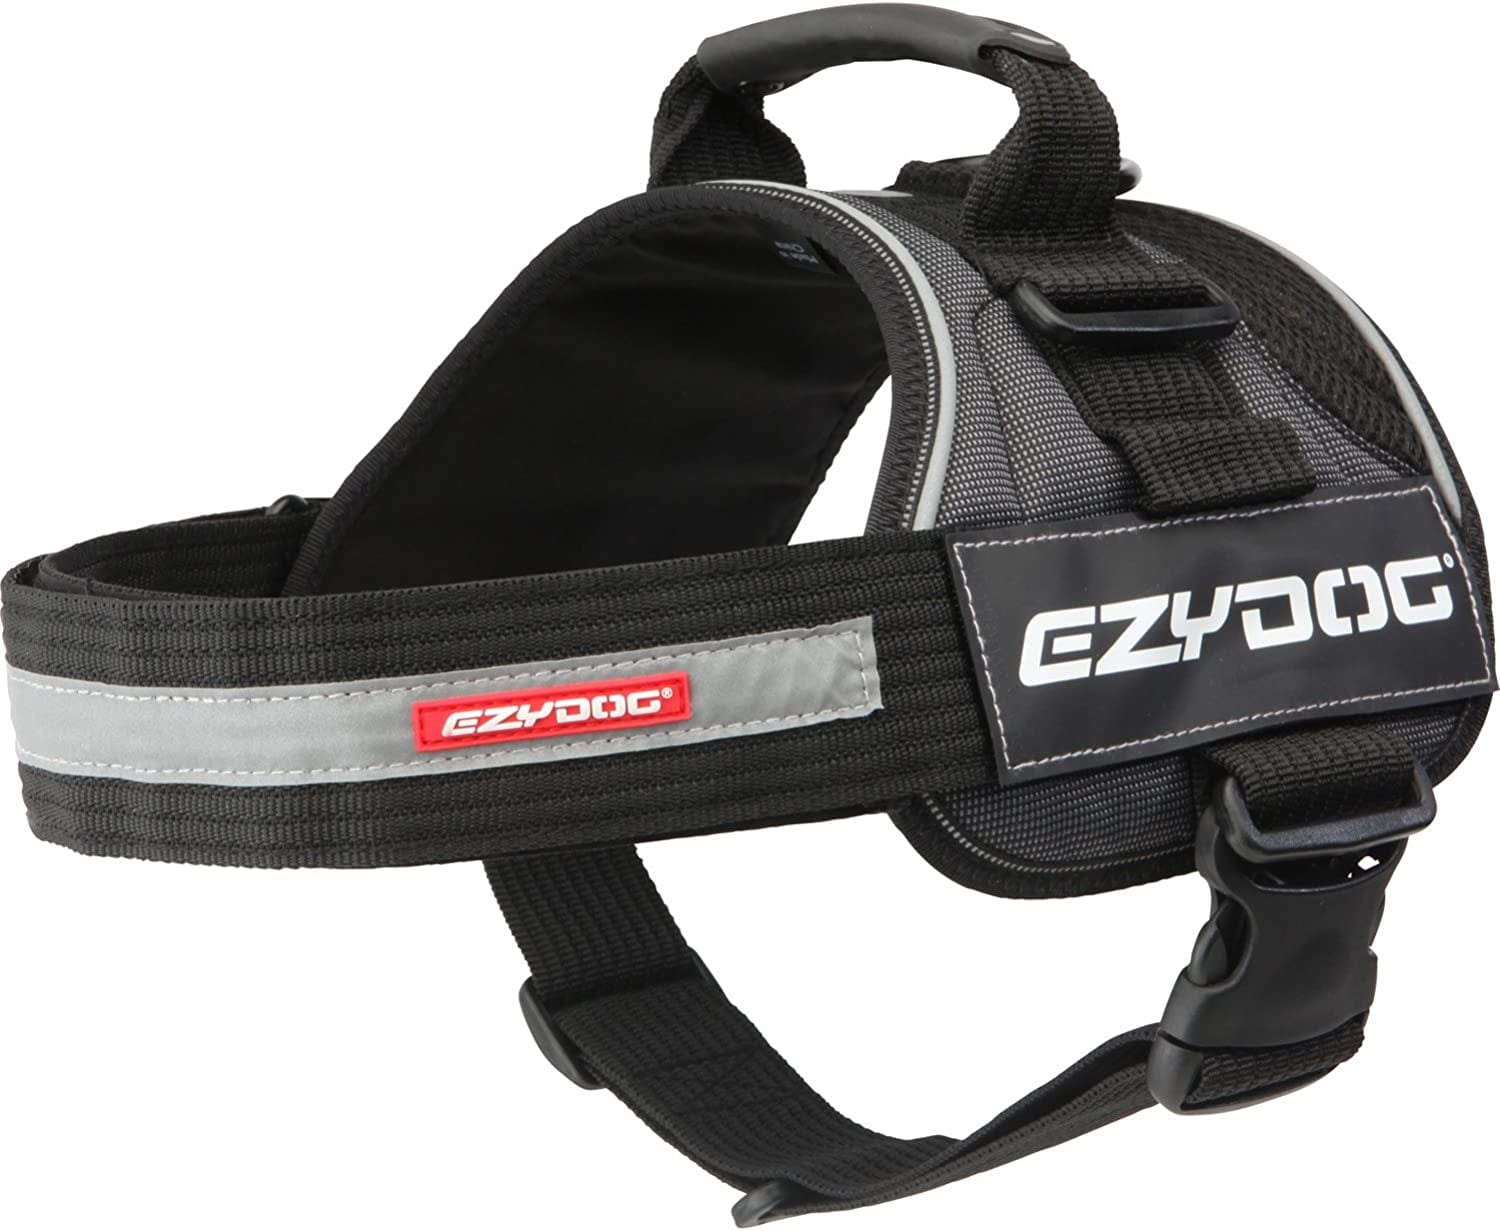 Ezydog Convert Trail-Ready Outdoor Adjustable Dog Harness - Perfect for Hiking, Walking, and Doubles as a Service Dog Vest - Superior Comfort Design with a Durable Traffic Handle (X-Small, Charcoal) Animals & Pet Supplies > Pet Supplies > Dog Supplies > Dog Apparel EzyDog, LLC Charcoal Large 